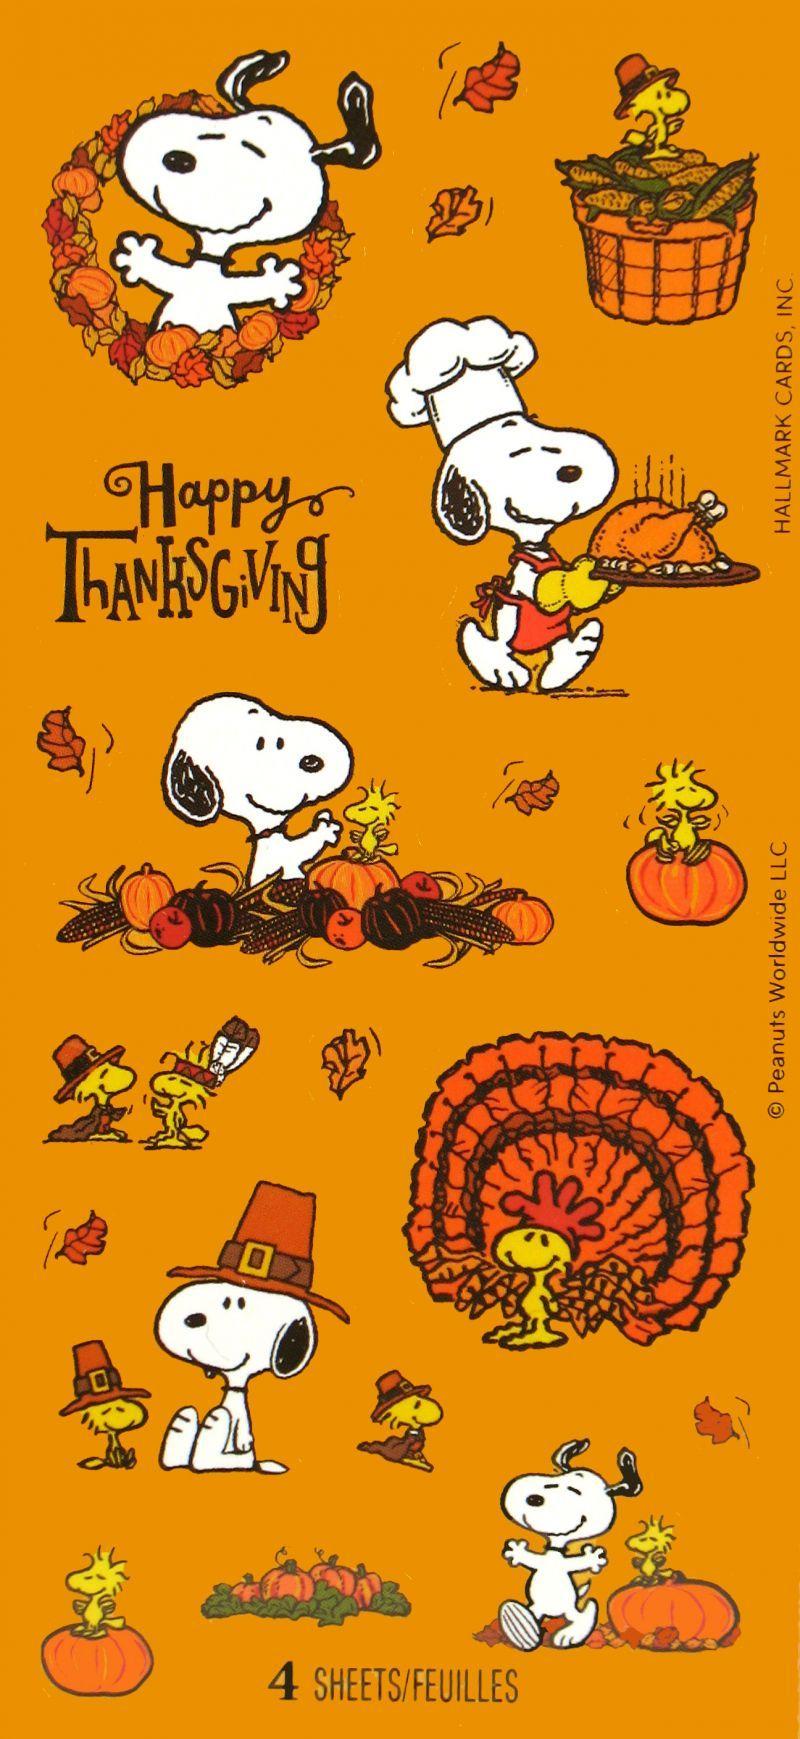 Thanksgiving iPhone Background! ideas. iphone background, thanksgiving wallpaper, fall wallpaper